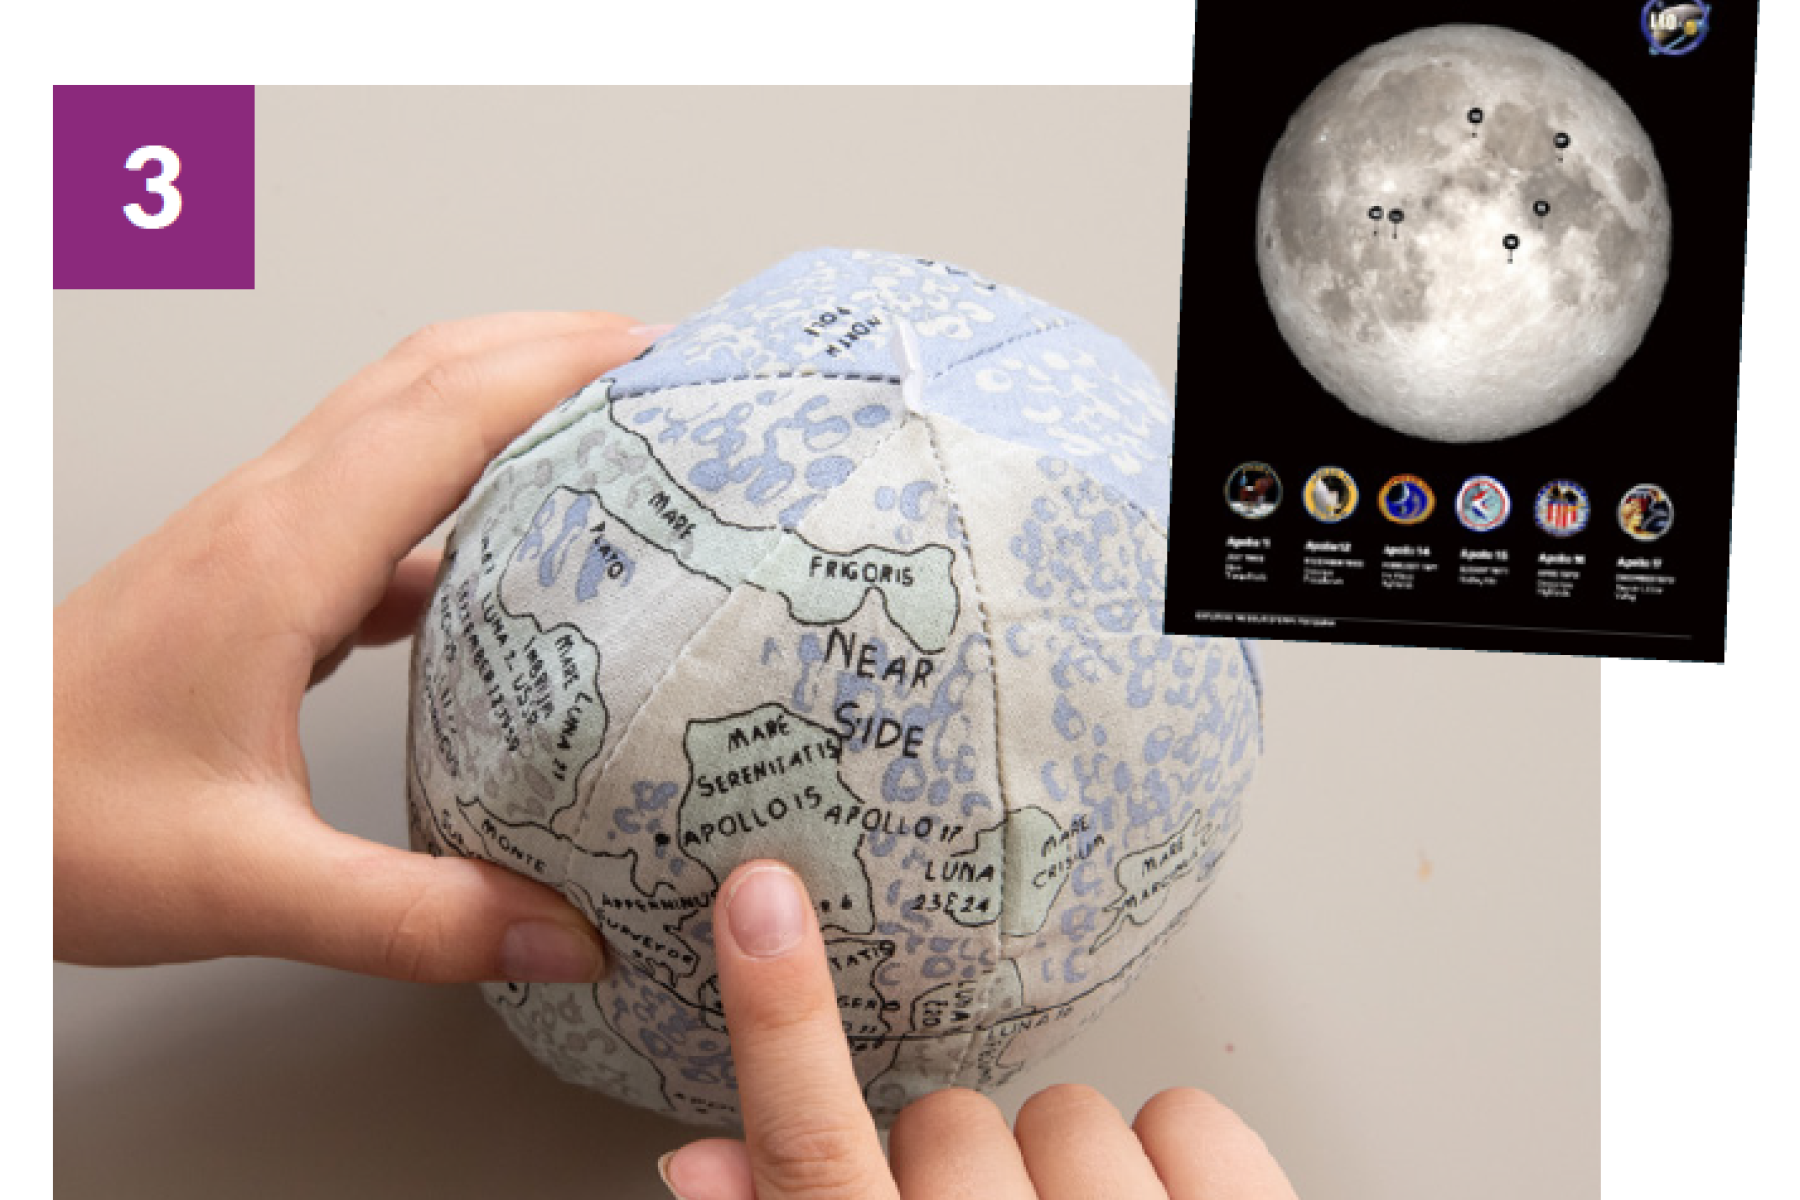 Image of a plushie Moon model with an overlay of a map of the Lunar surface